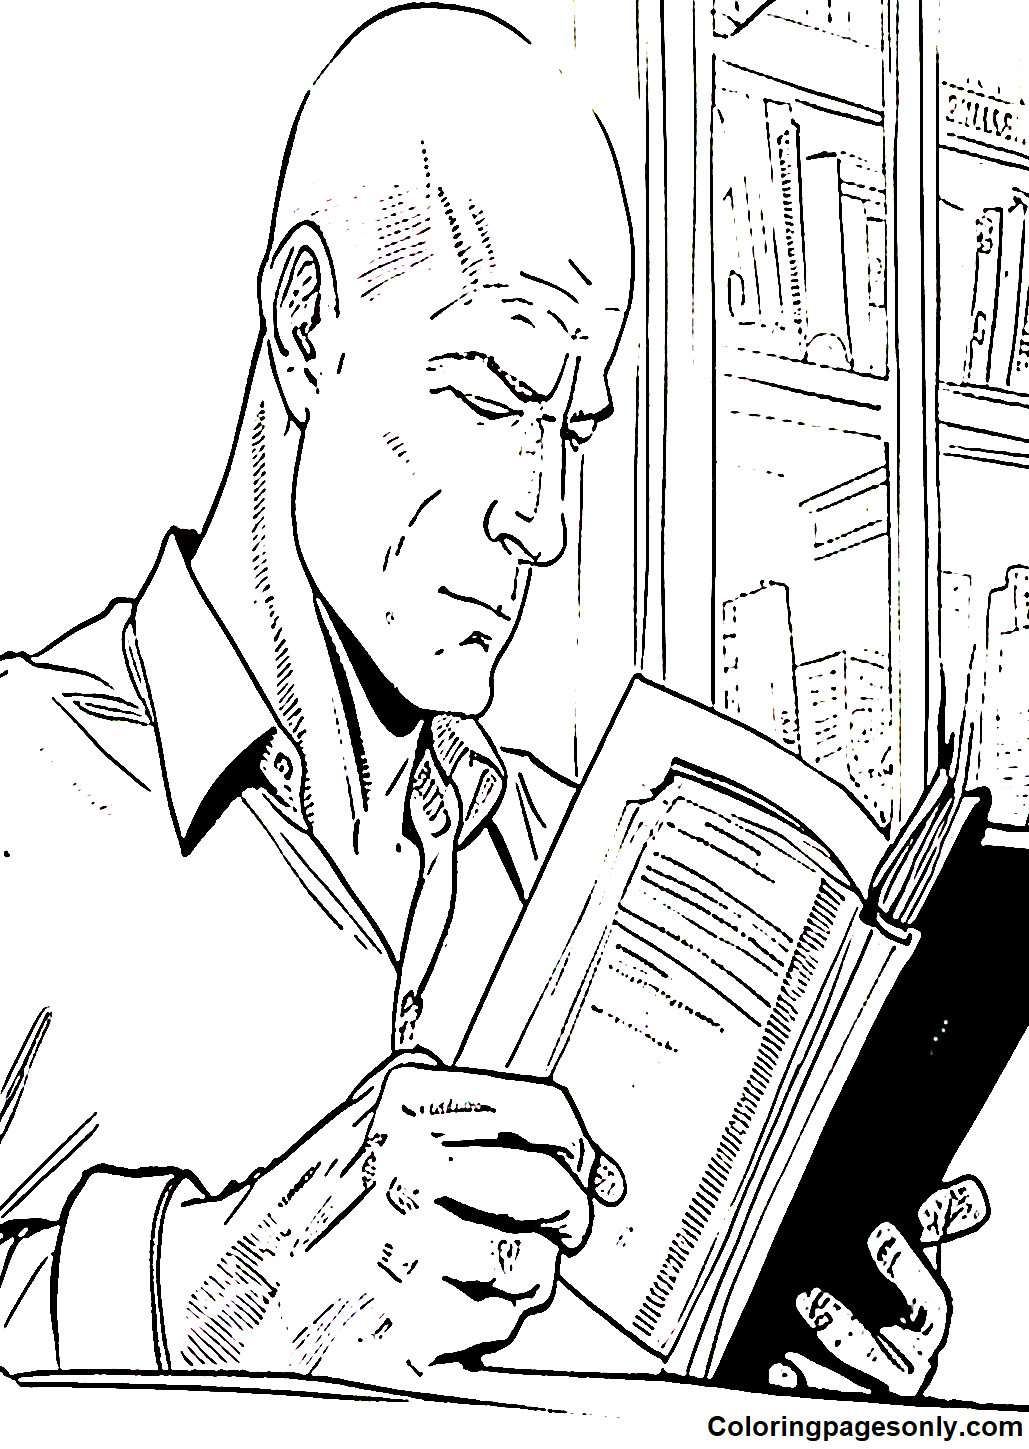 Bruce Willis Picture Coloring Pages